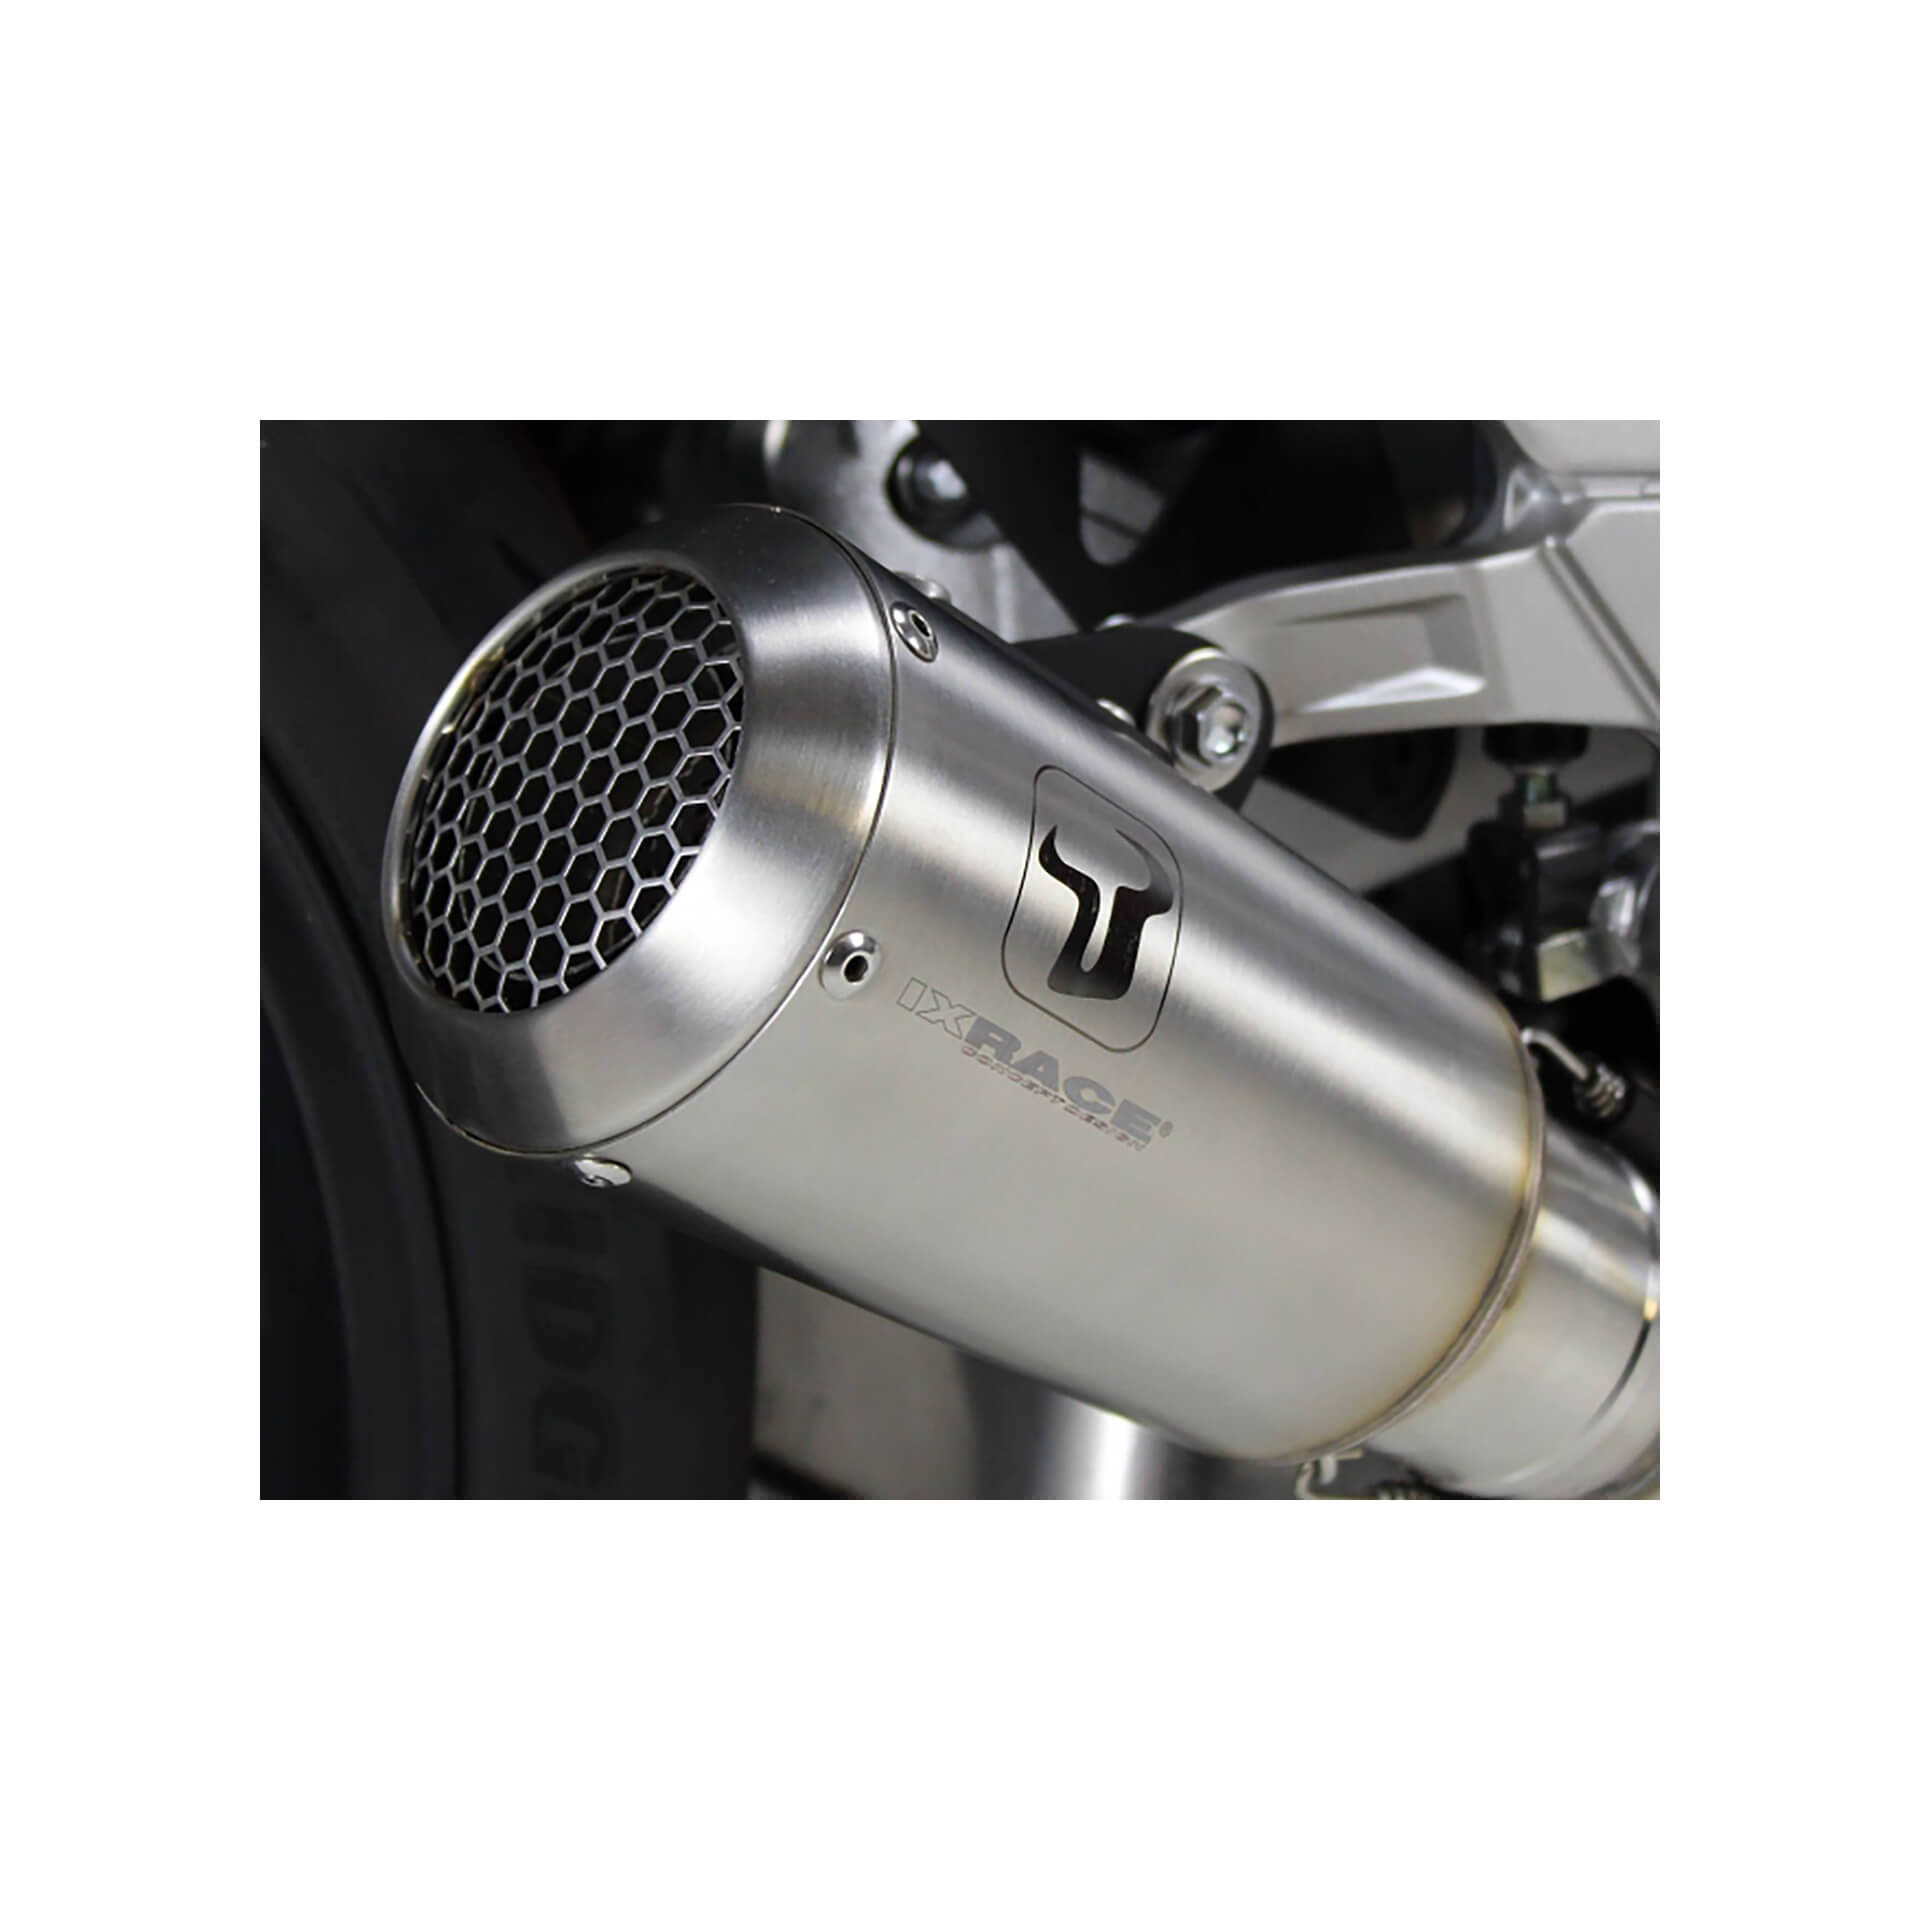 ixrace Stainless steel complete system MK2 for Z 650/650 Ninja, 17-19